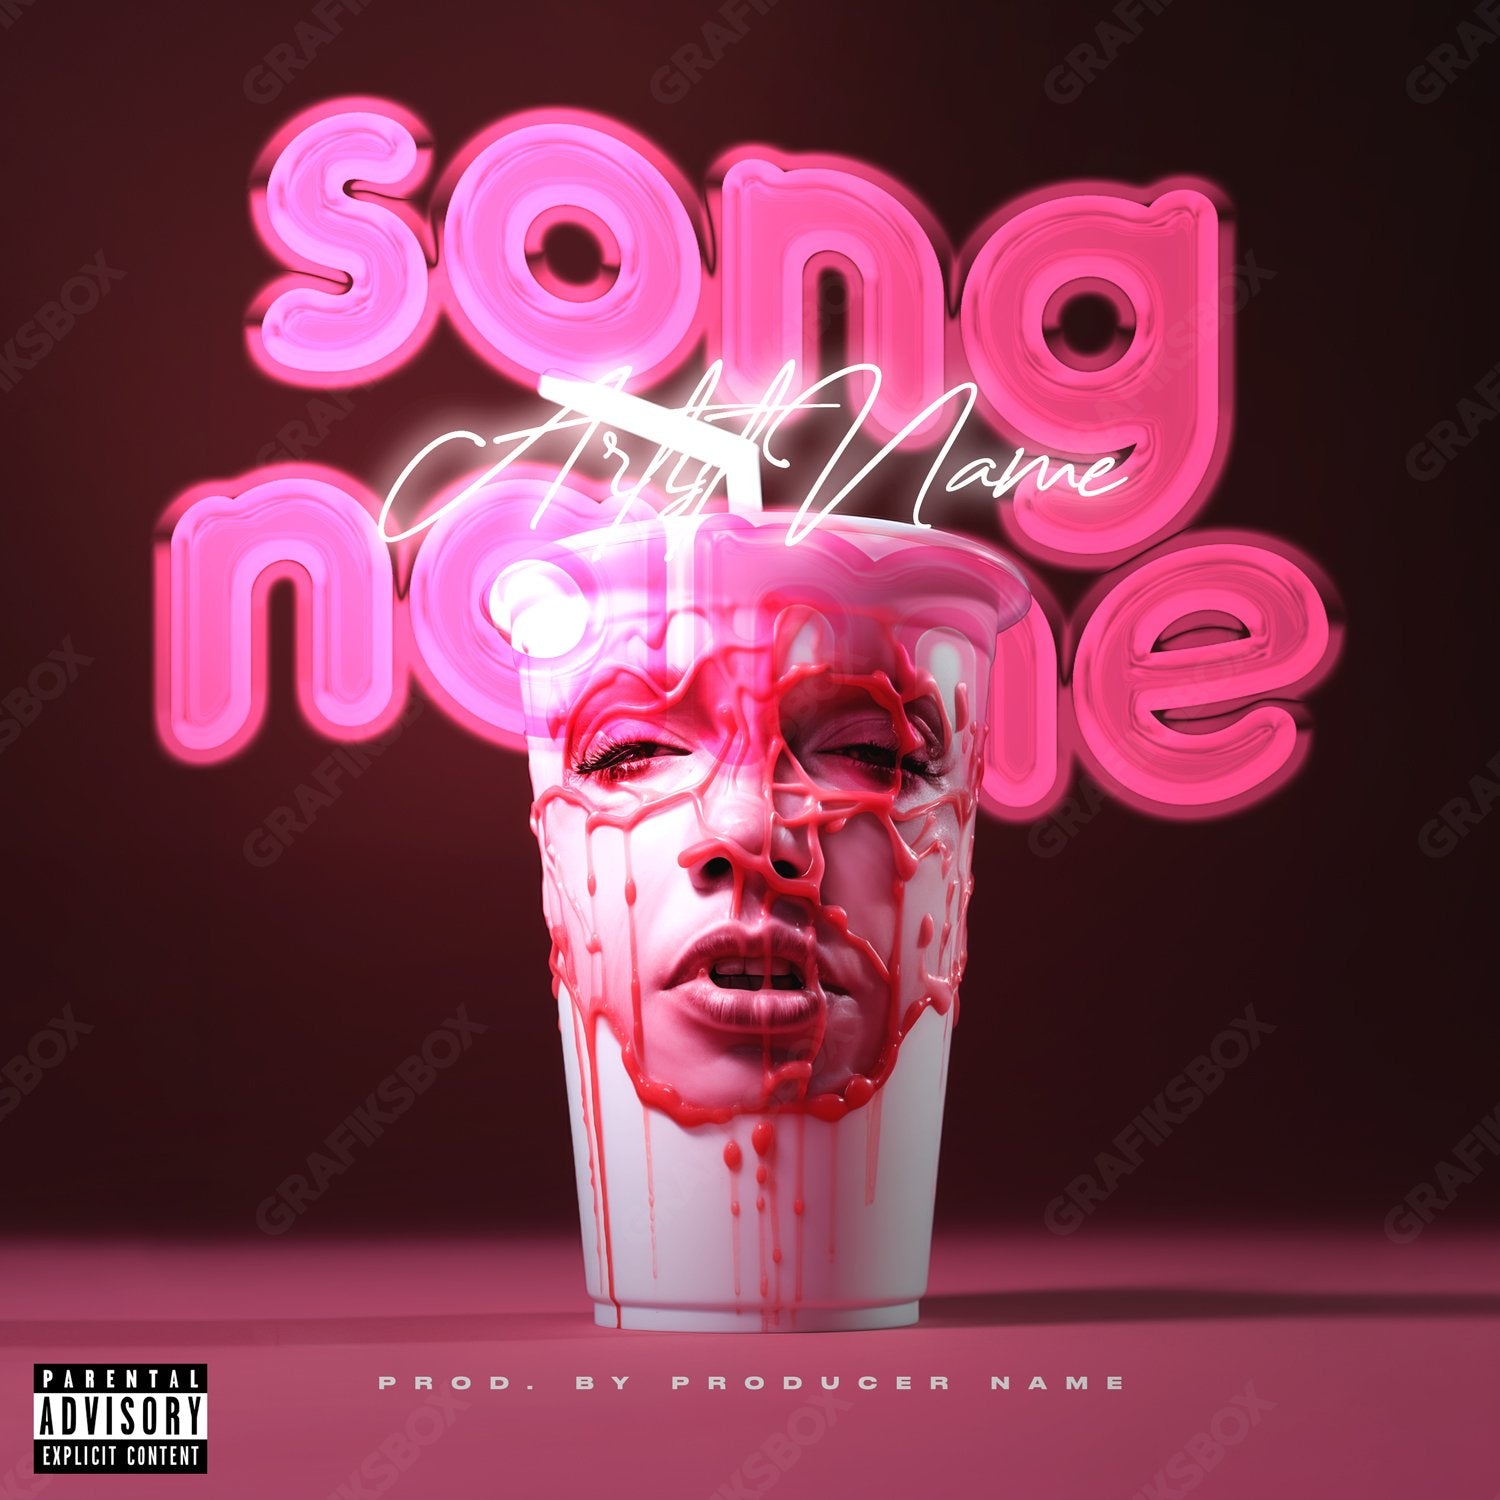 Pink Cup premade cover art